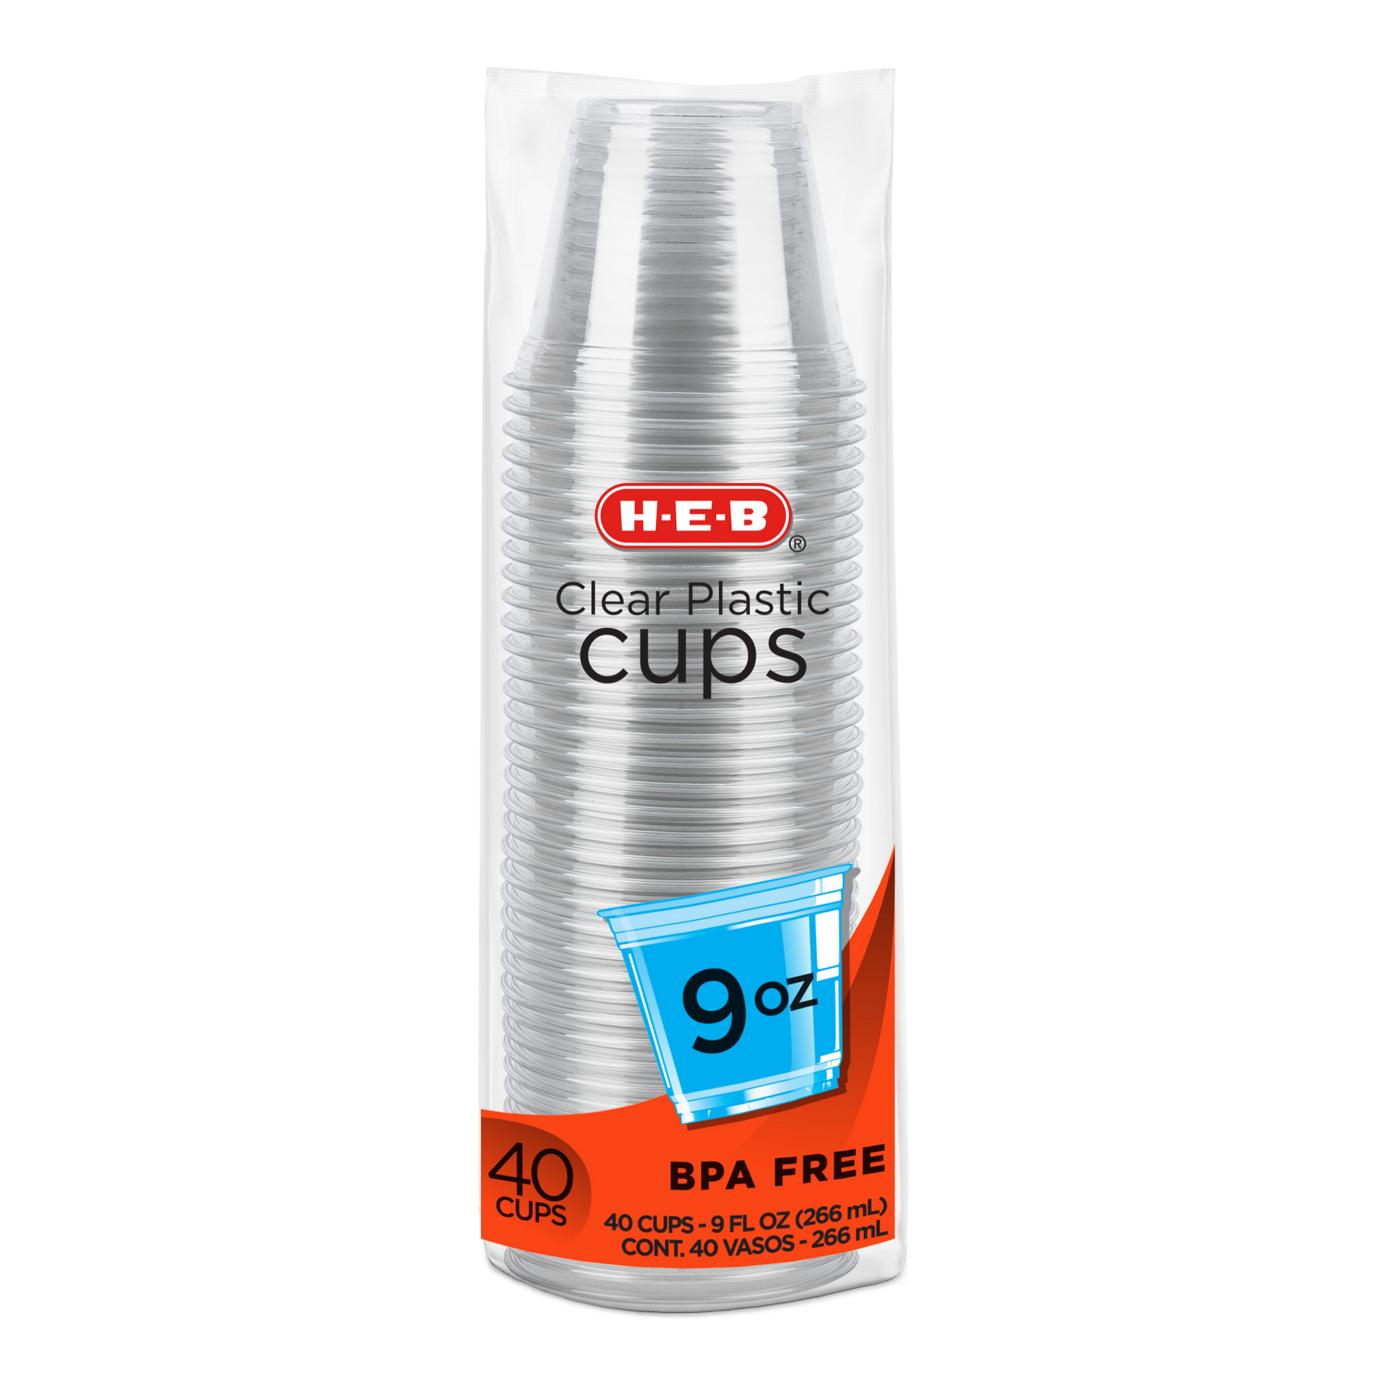 H-E-B 9 oz Clear Plastic Cups; image 1 of 4